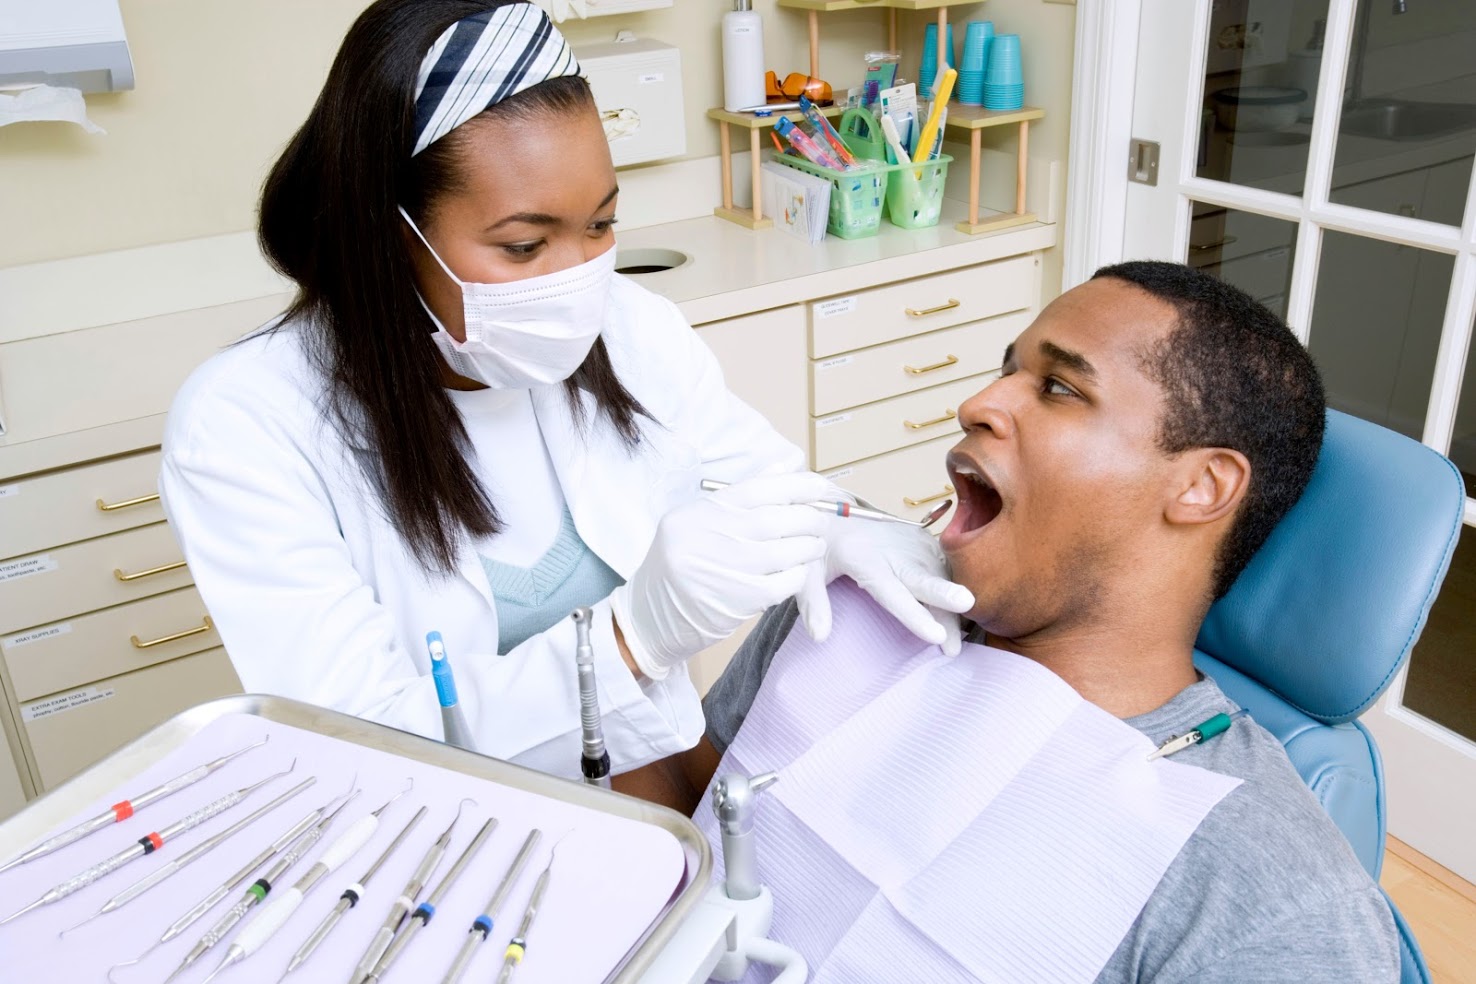 A man getting his teeth examined at the dentist